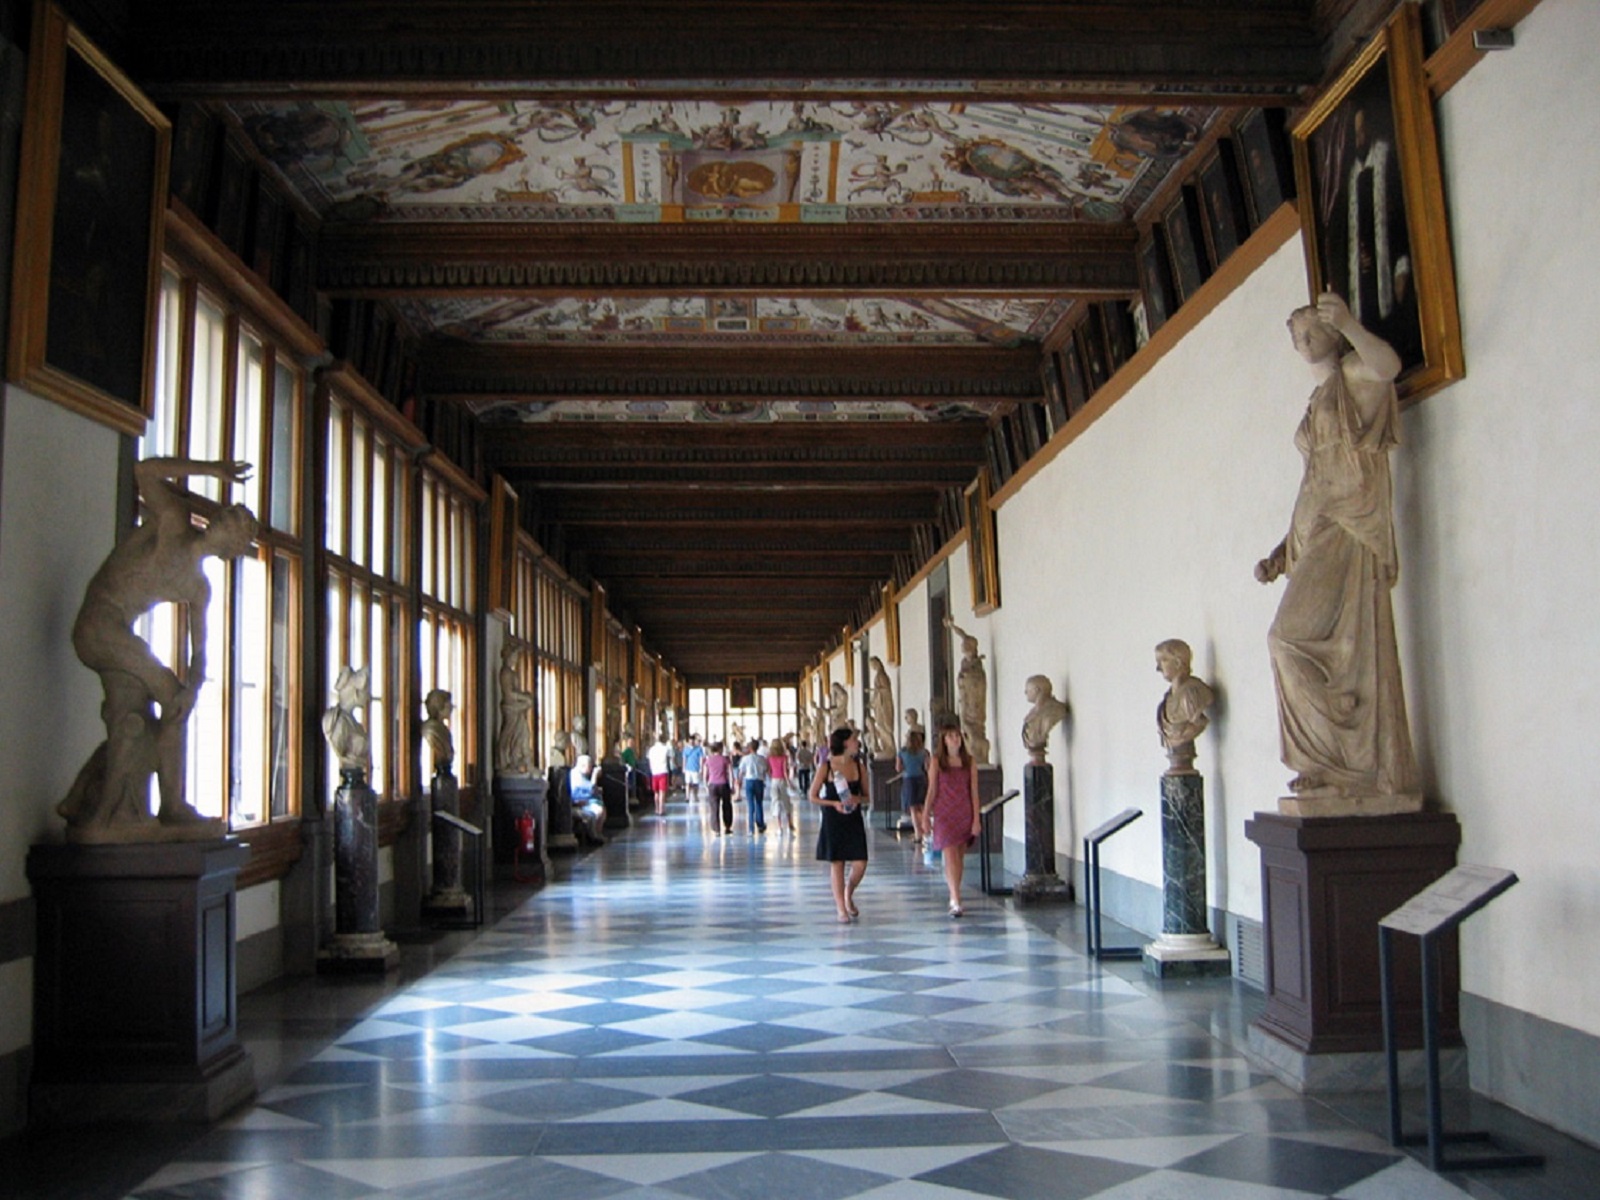 Guided tour of the Uffizi Gallery and its splendid masterpieces